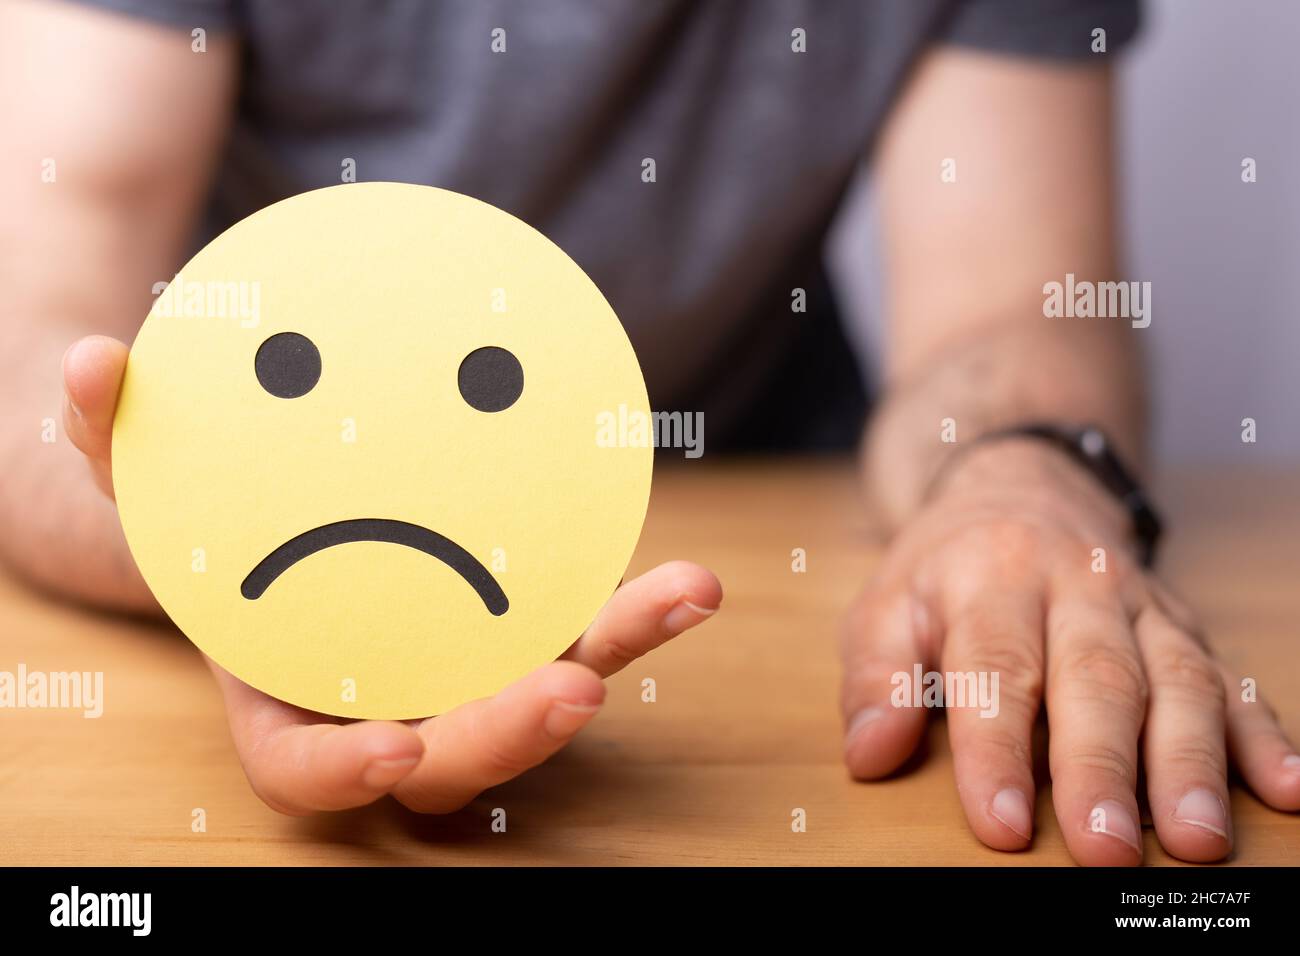 Close-up shot of a hand holding a sad expression emotion smiley on a yellow paper Stock Photo